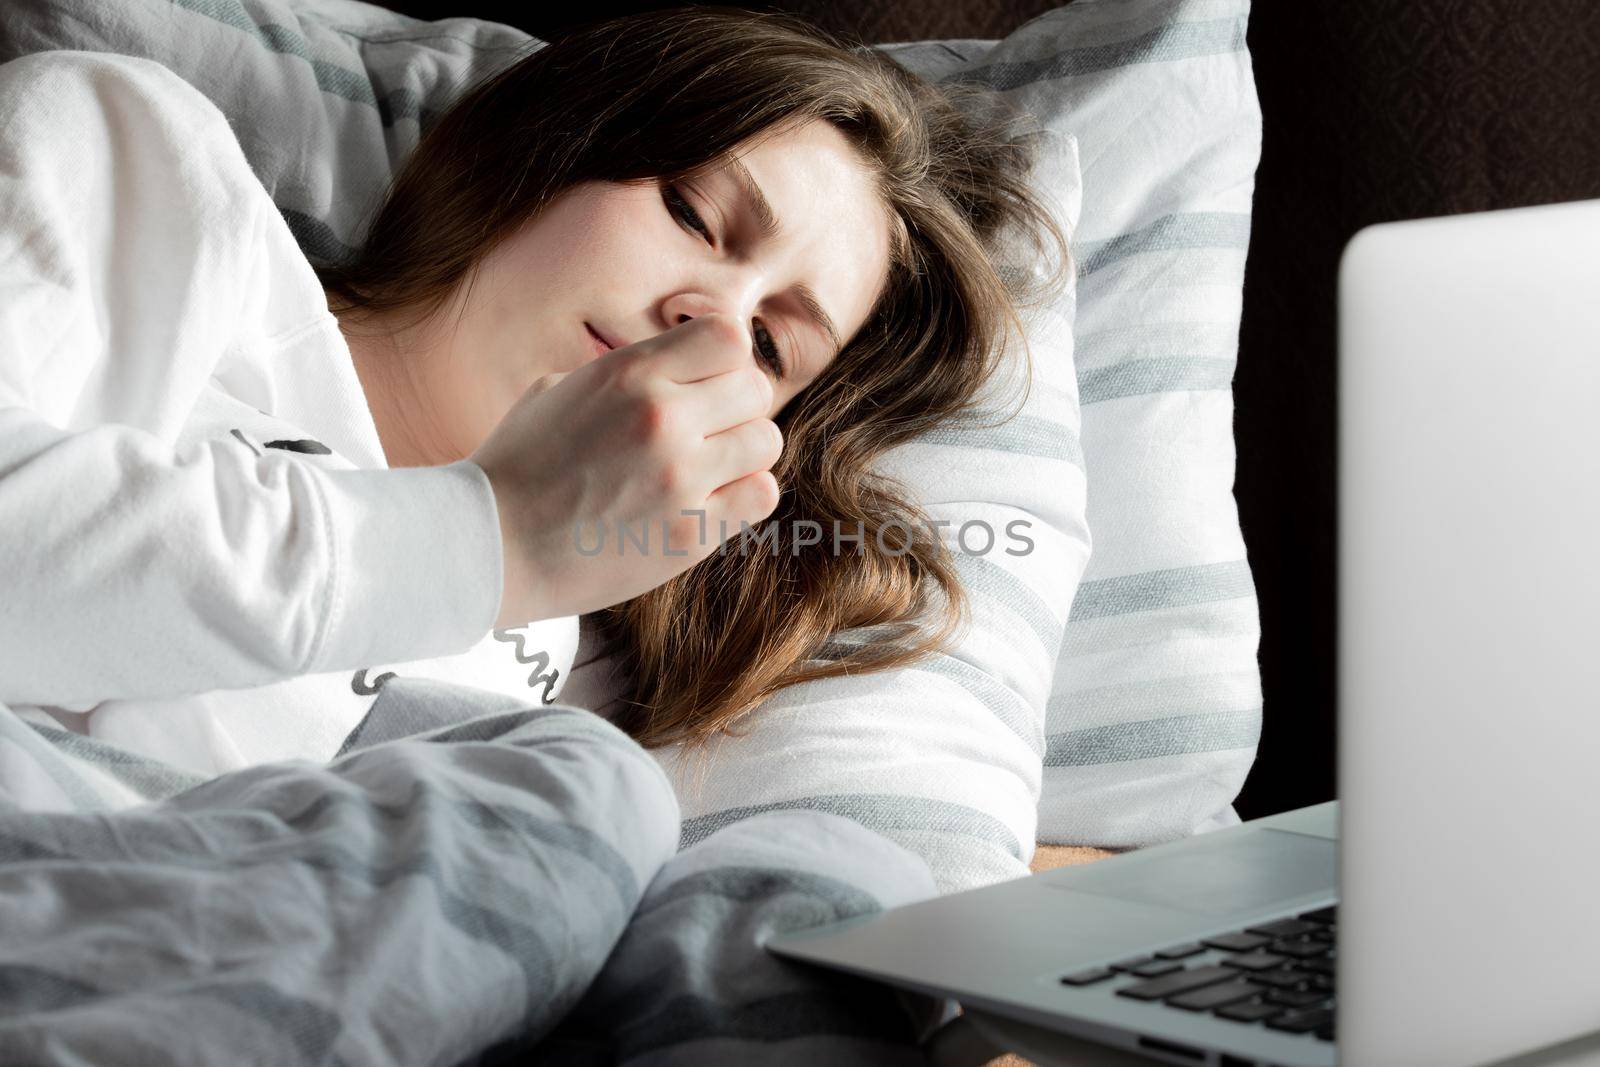 A young cute girl on a sunny day in a white jacket lies on the bed and looks at her nails. A laptop is standing nearby.